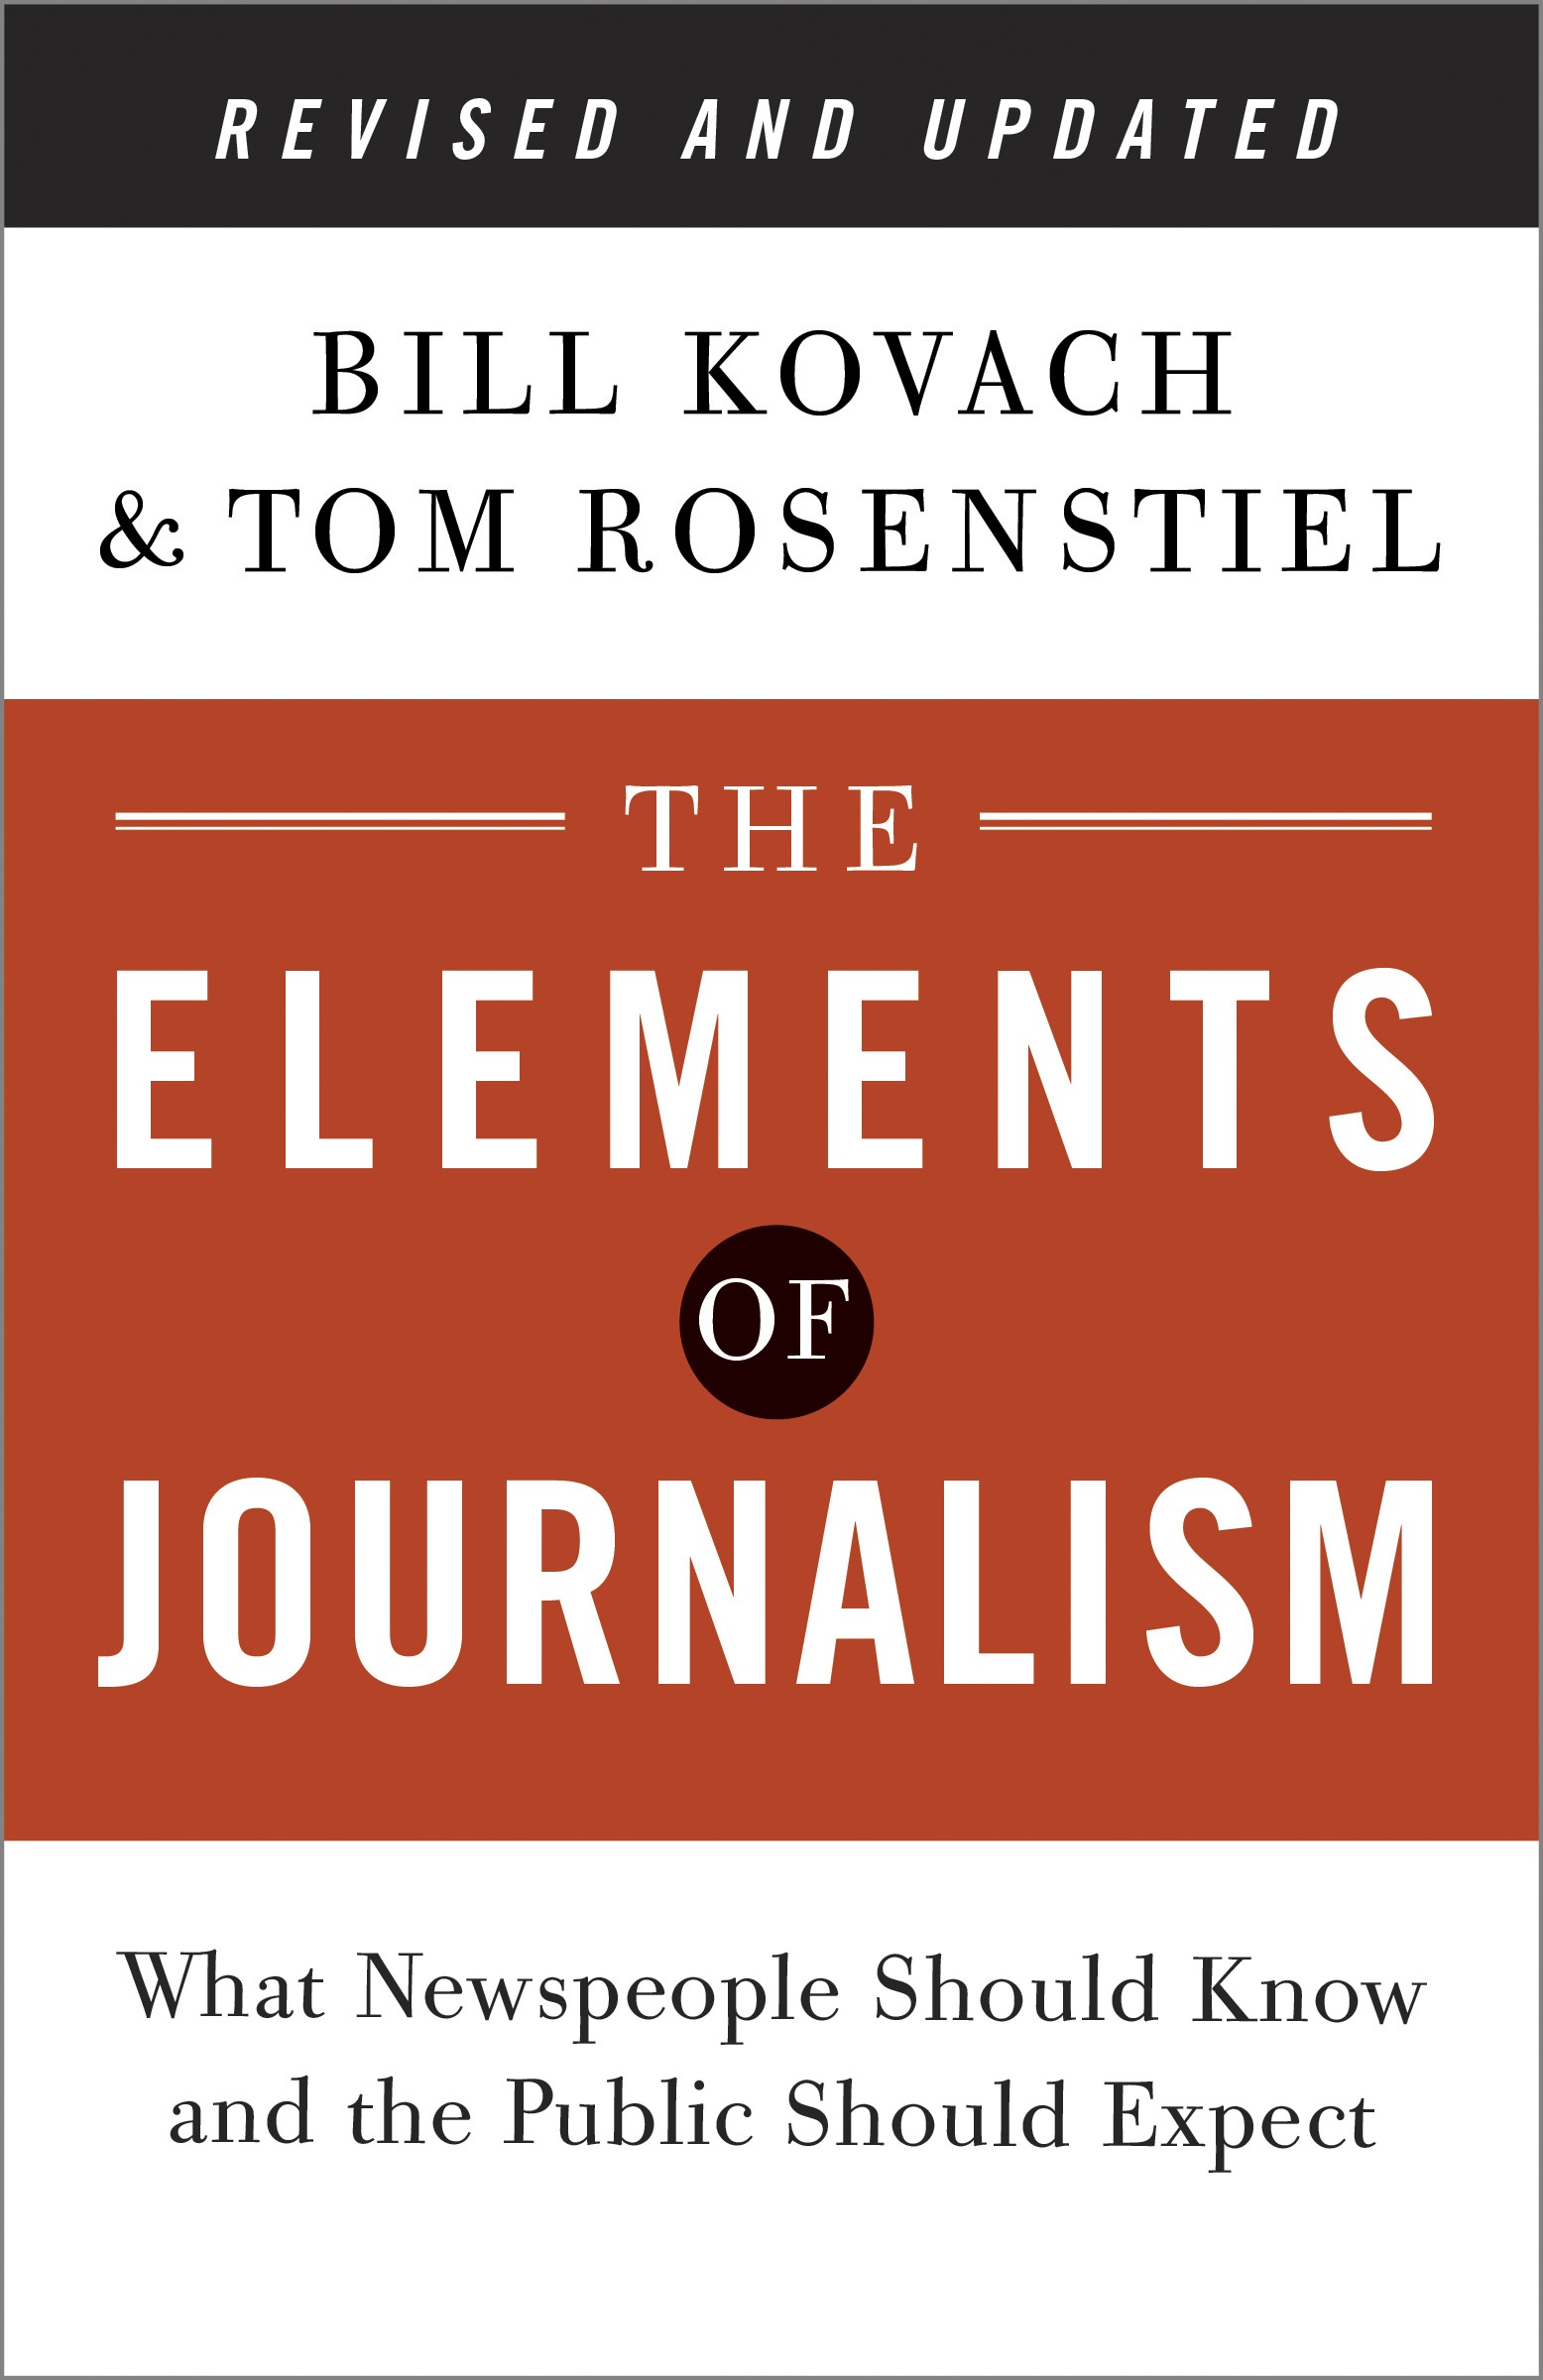 The Elements of Journalism, Revised and Updated 3rd Edition - 10-14.99